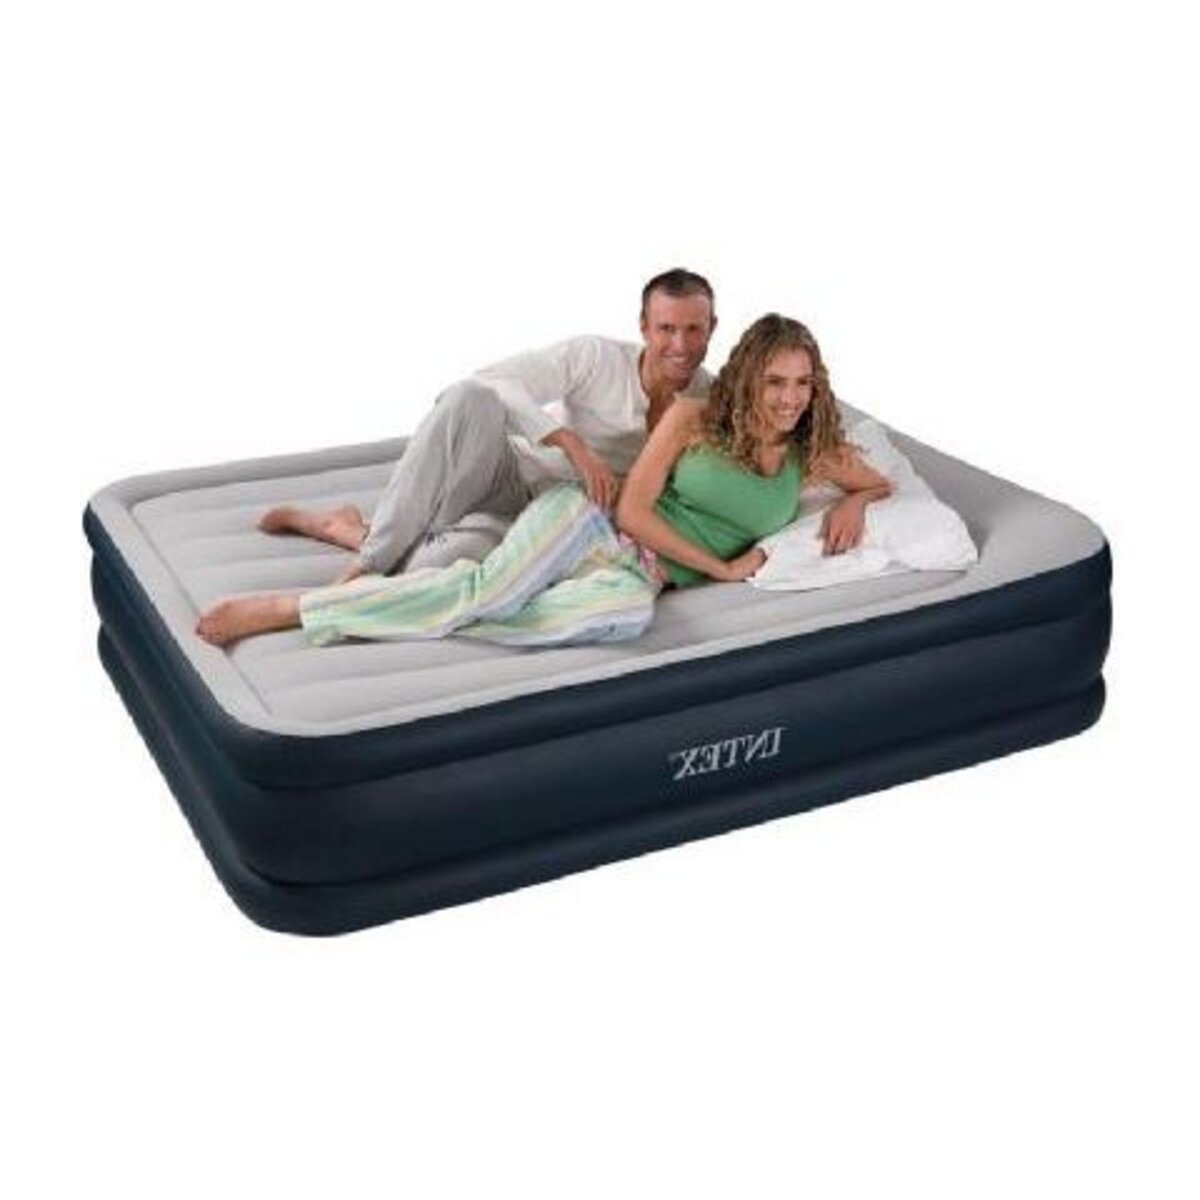 INTEX Lit gonflable DELUXE REST BED 2 places